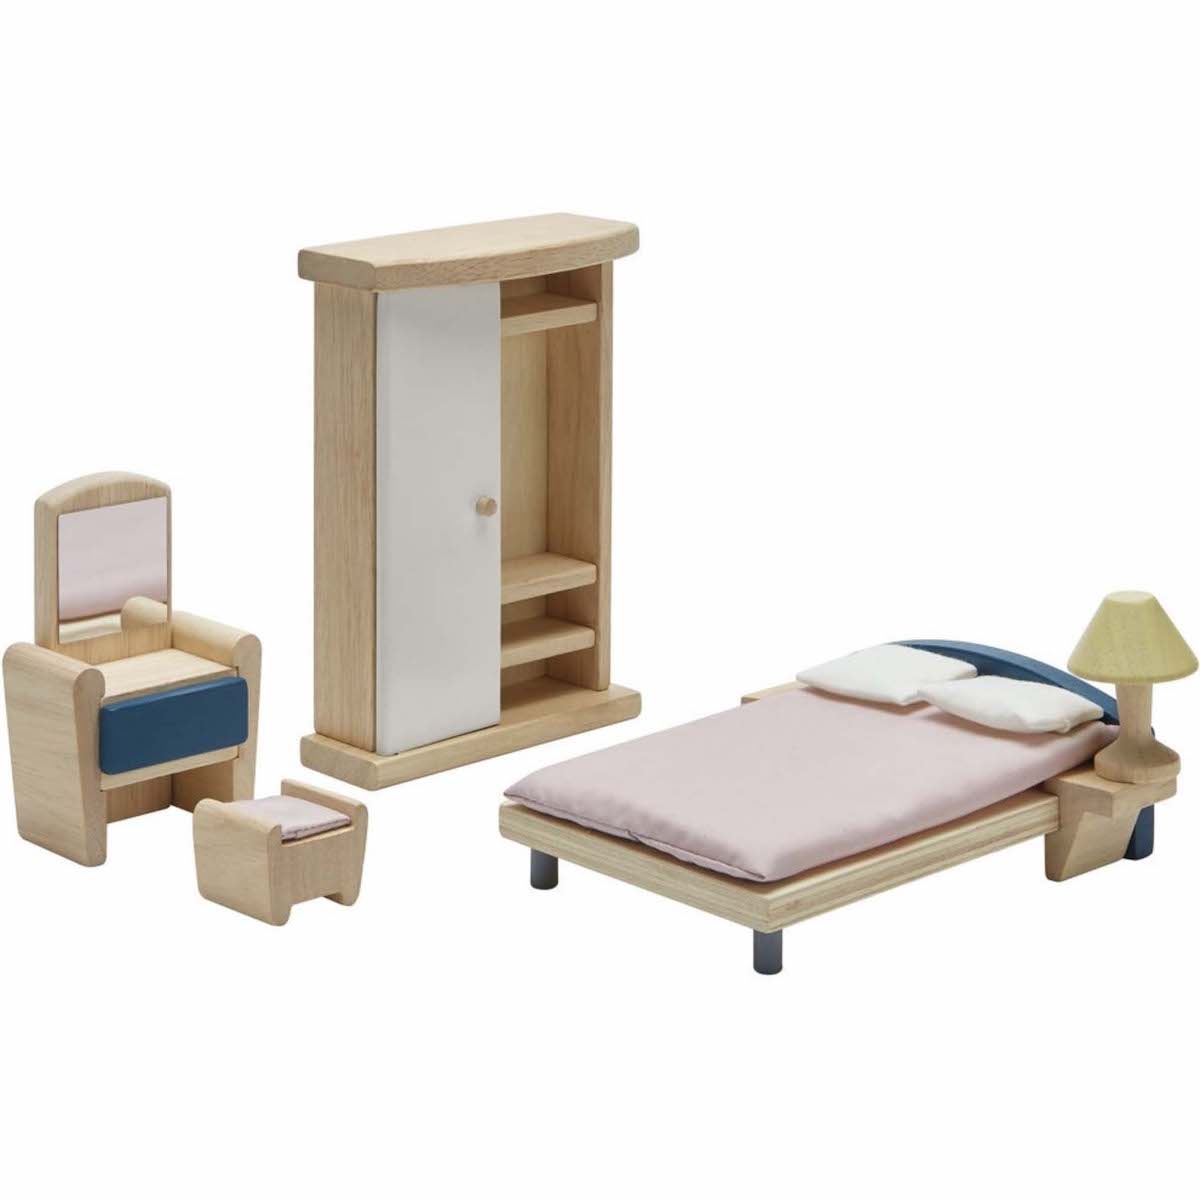 Bedroom Dolls House Furniture - Orchard Collection 7357